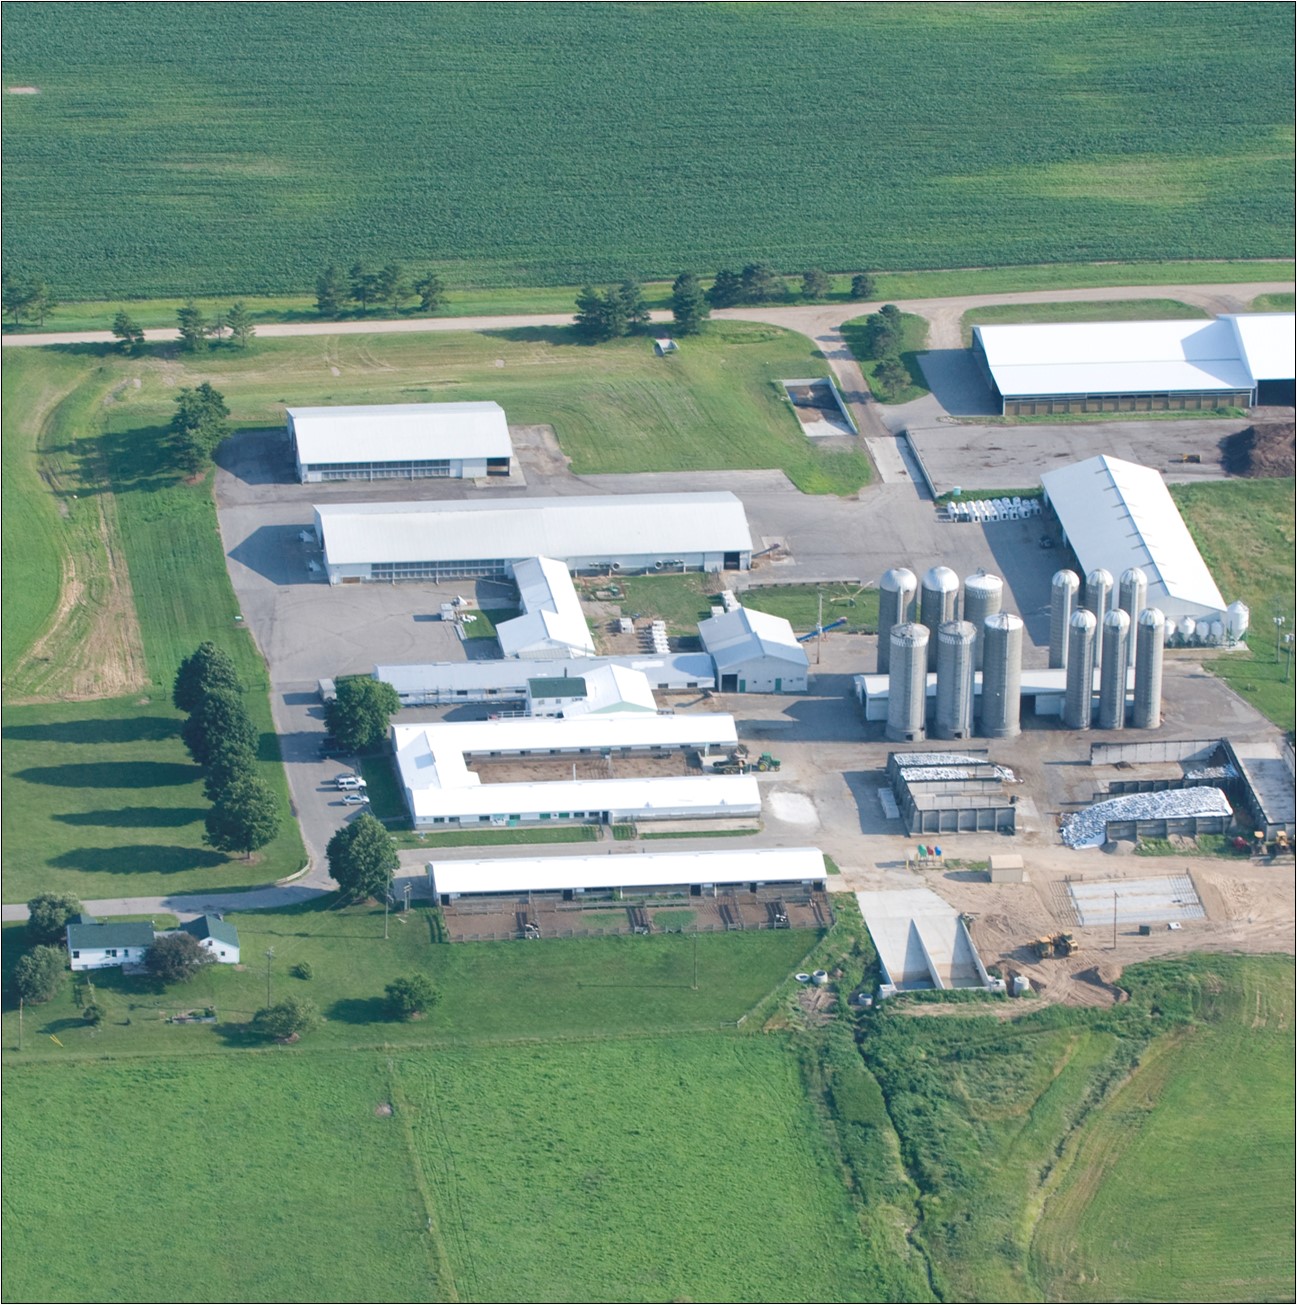 Aerial photo of the Dairy Facility